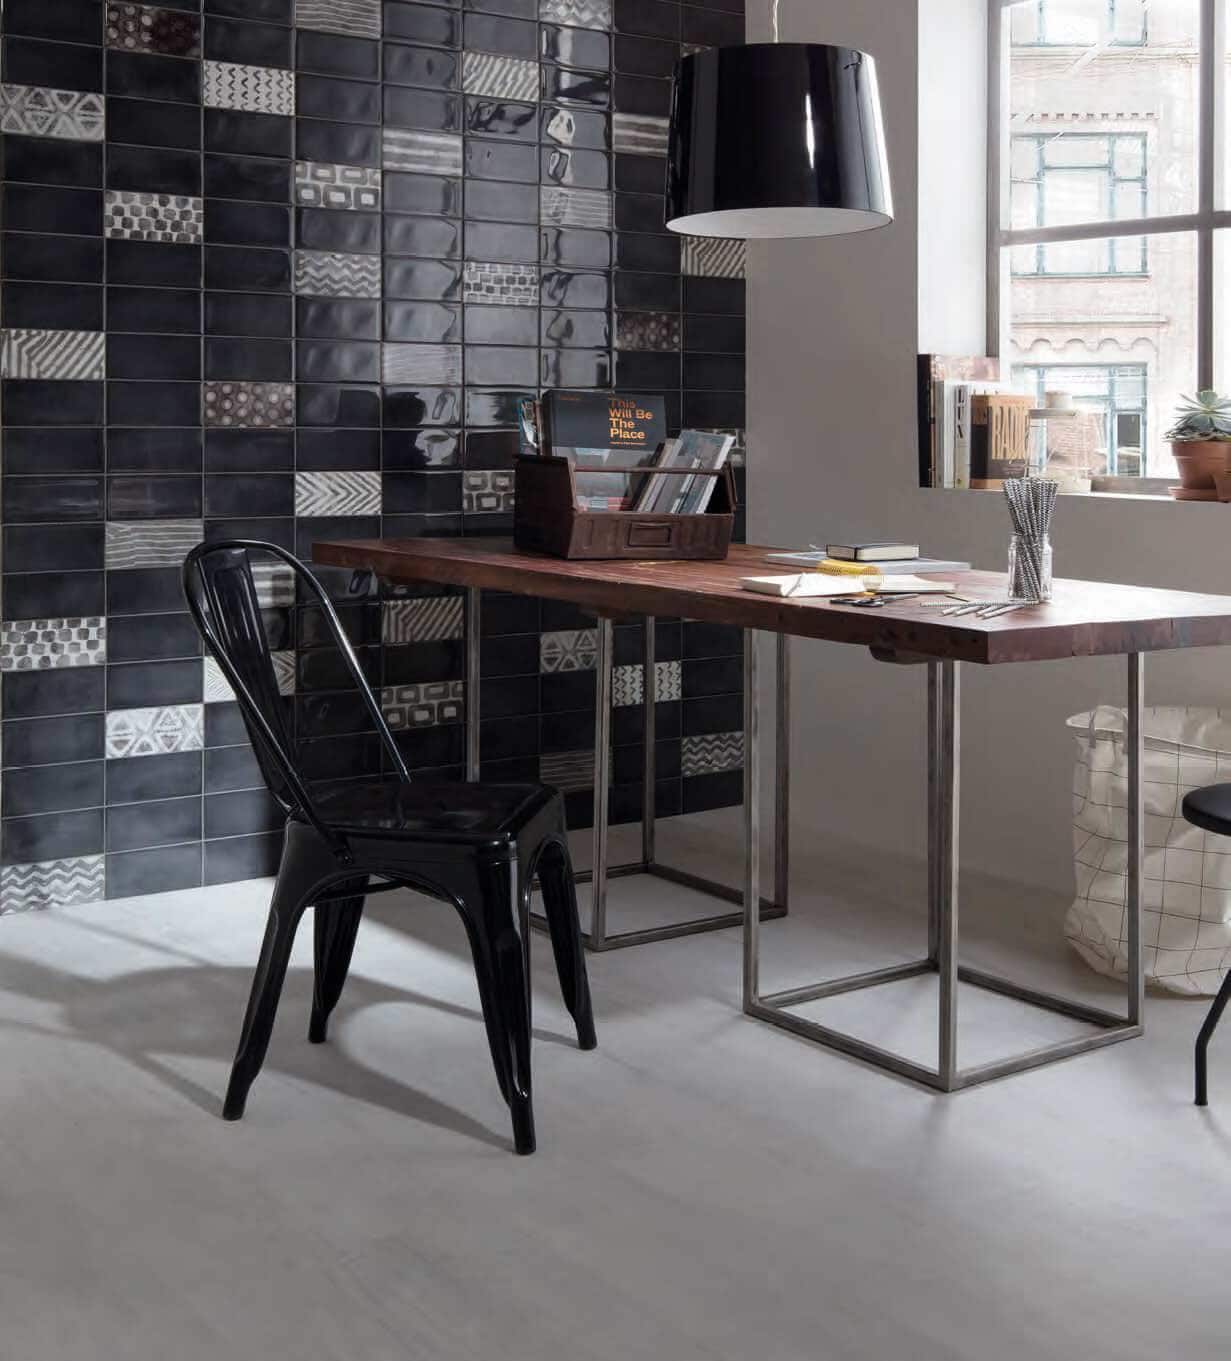 home office space with dar backsplash wall tile in unique design